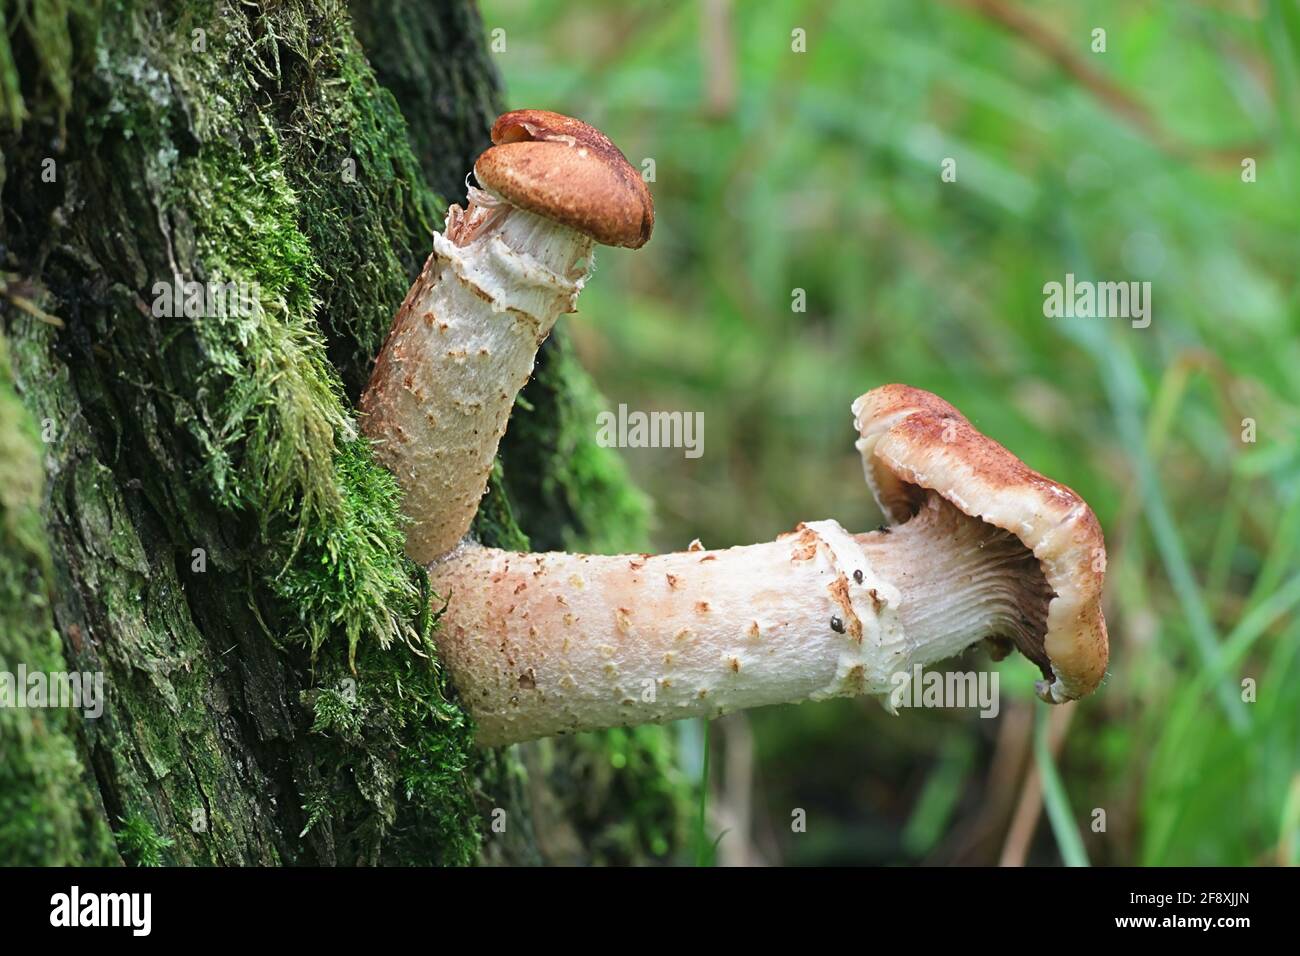 Armillaria lutea, commonly known as the bulbous honey fungus, wild mushroom from Finland Stock Photo